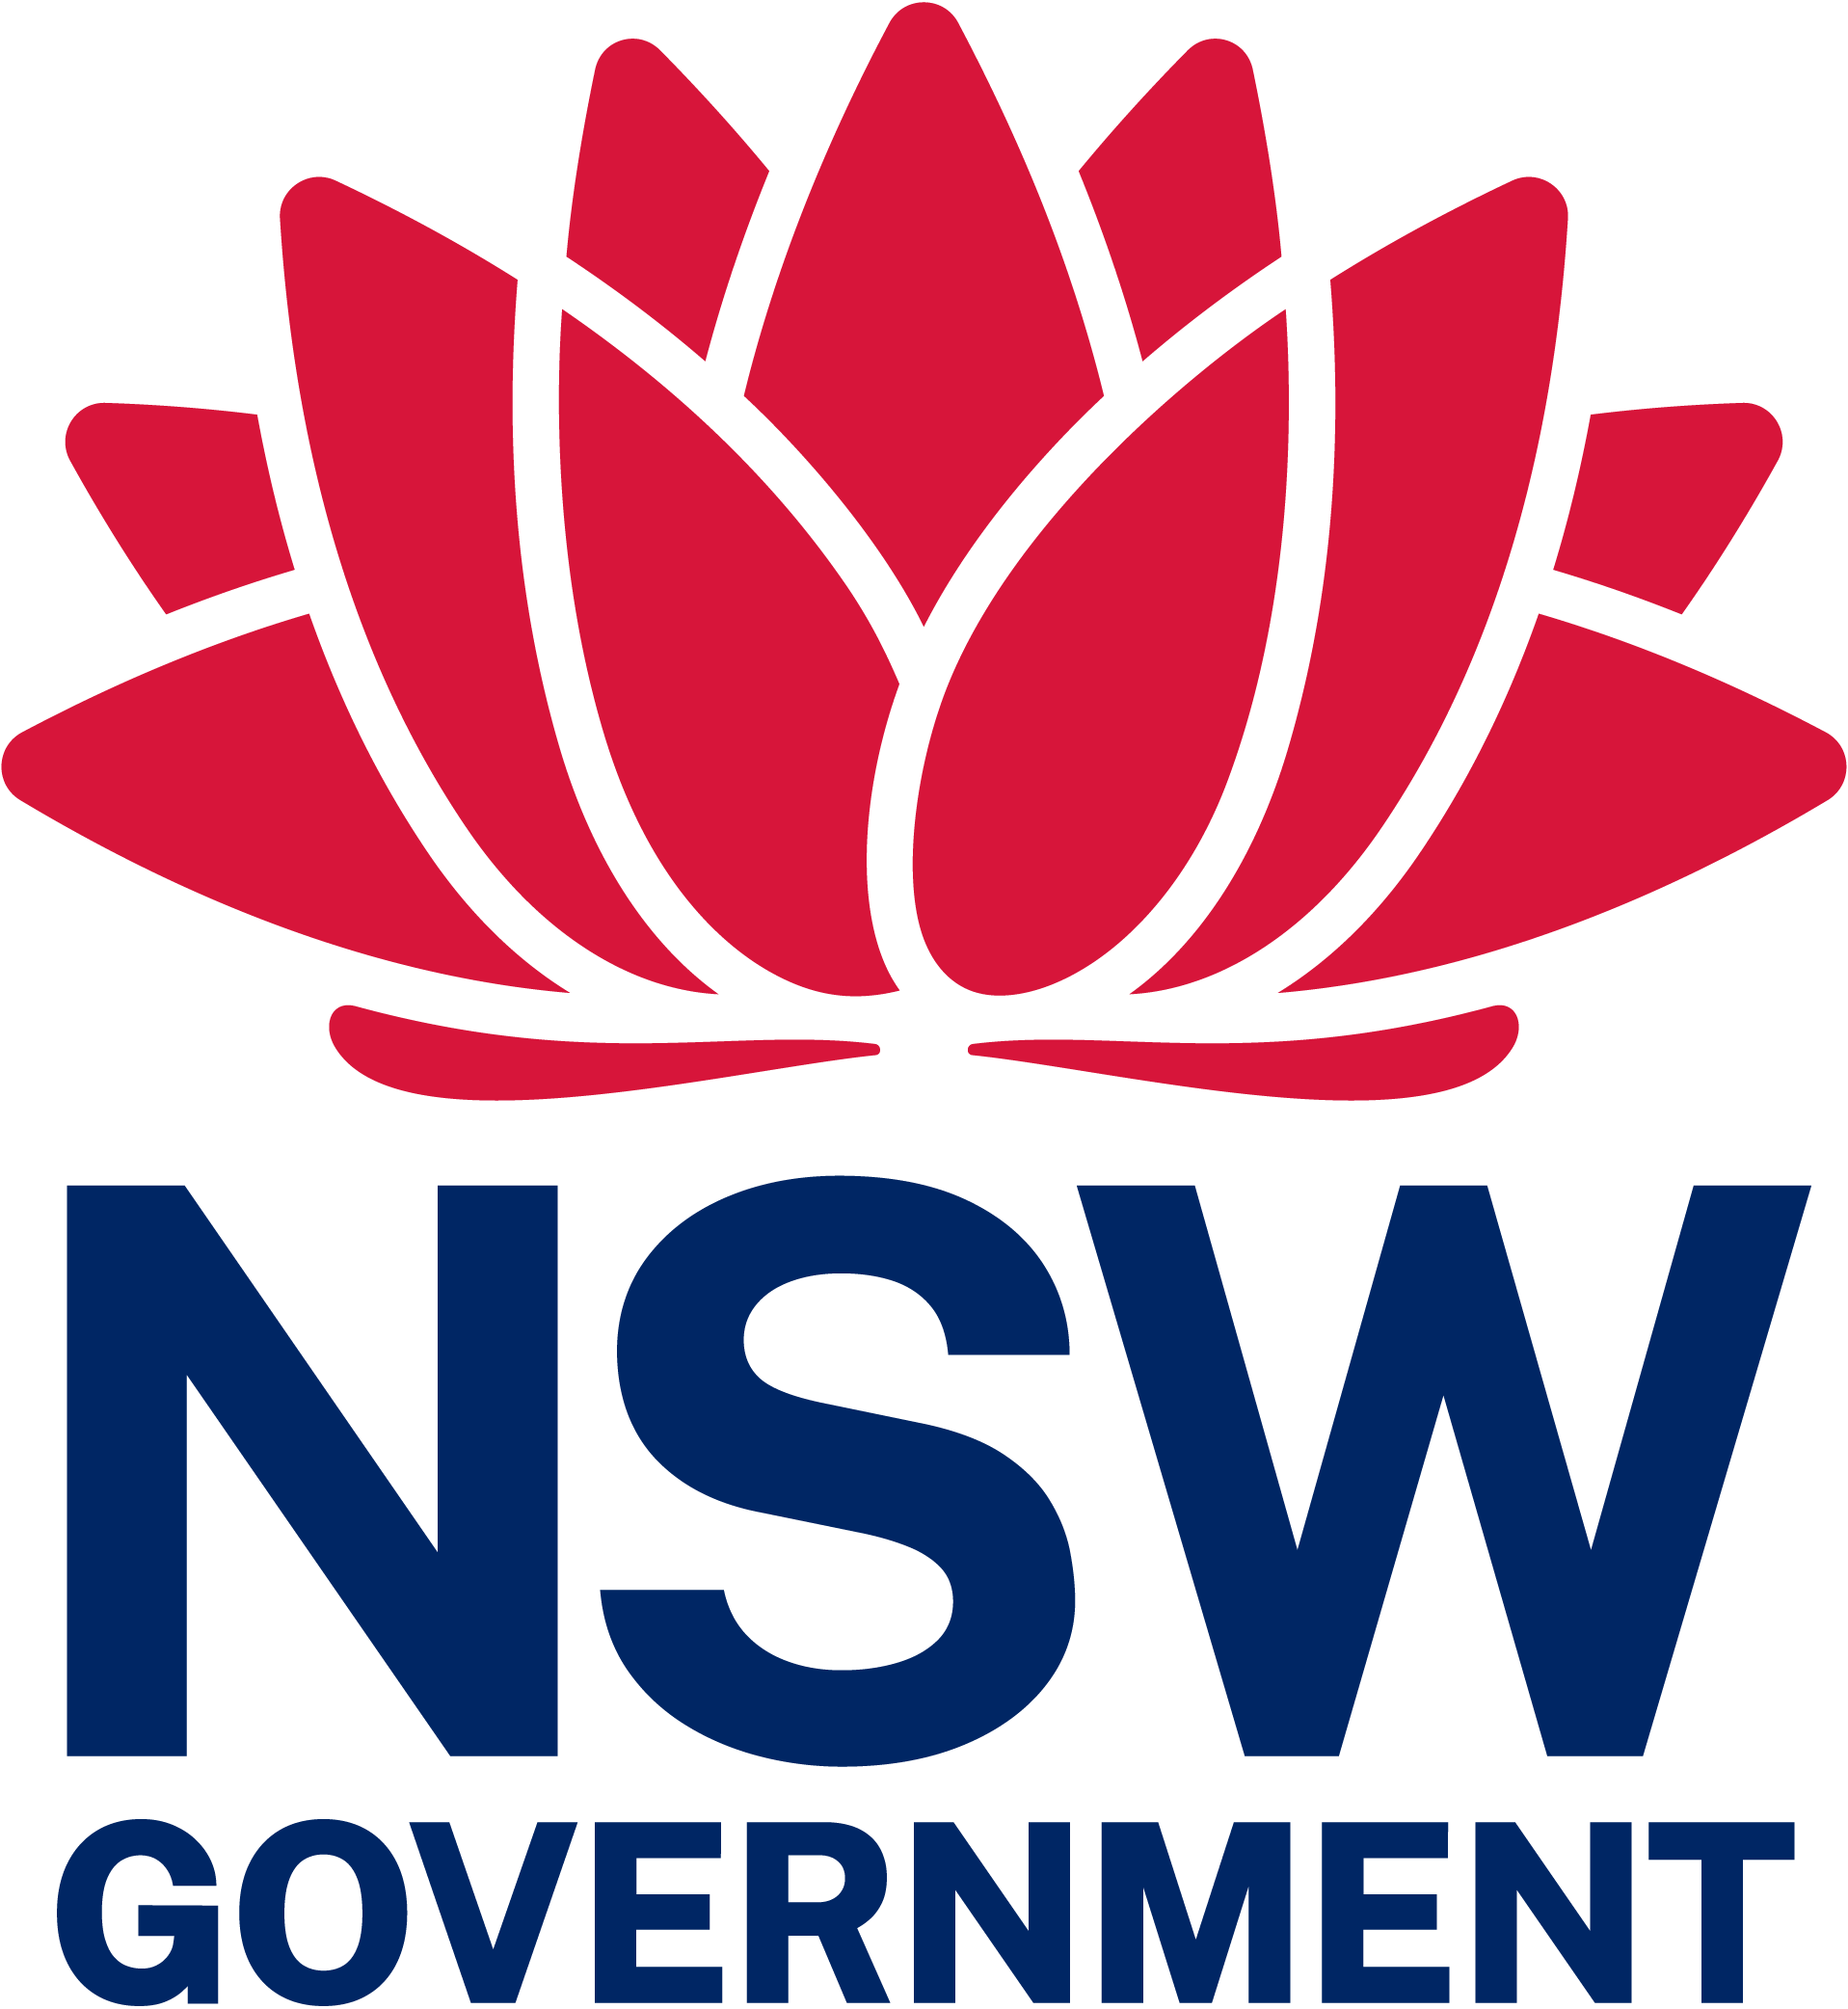 updated NSW Govt logo.png